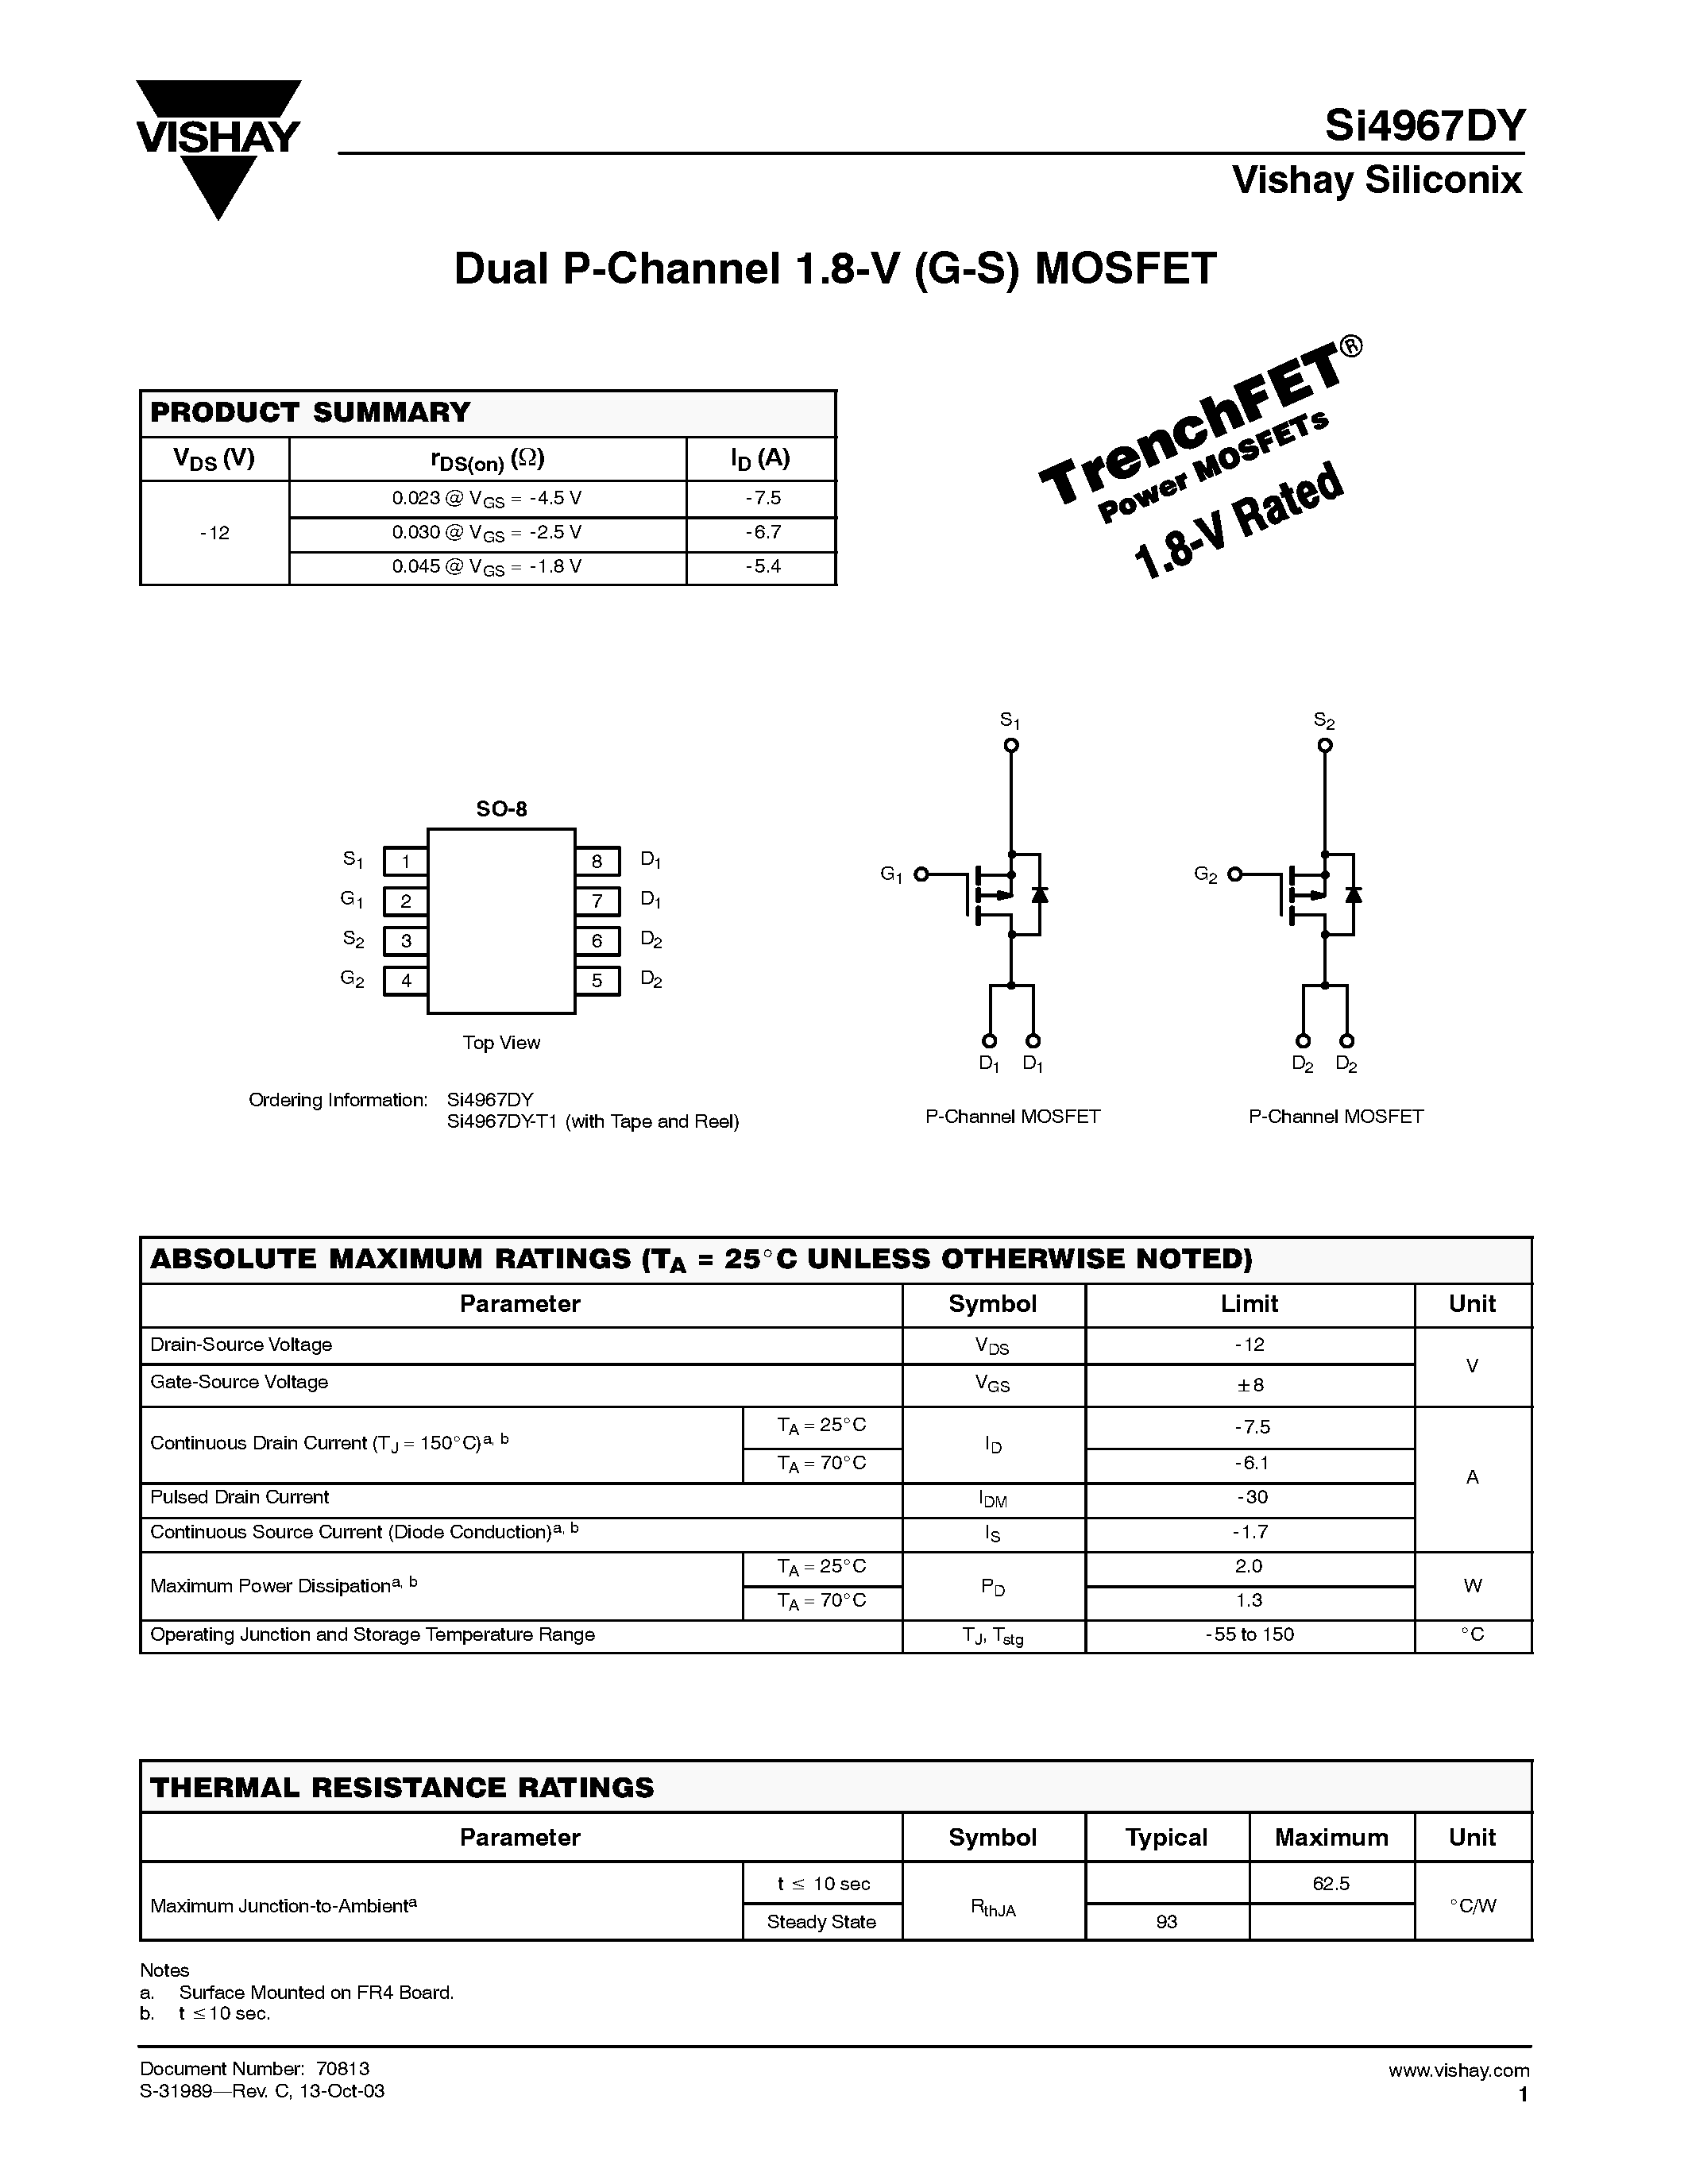 Даташит SI4967DY - Dual P-Channel 1.8-V (G-S) MOSFET страница 1